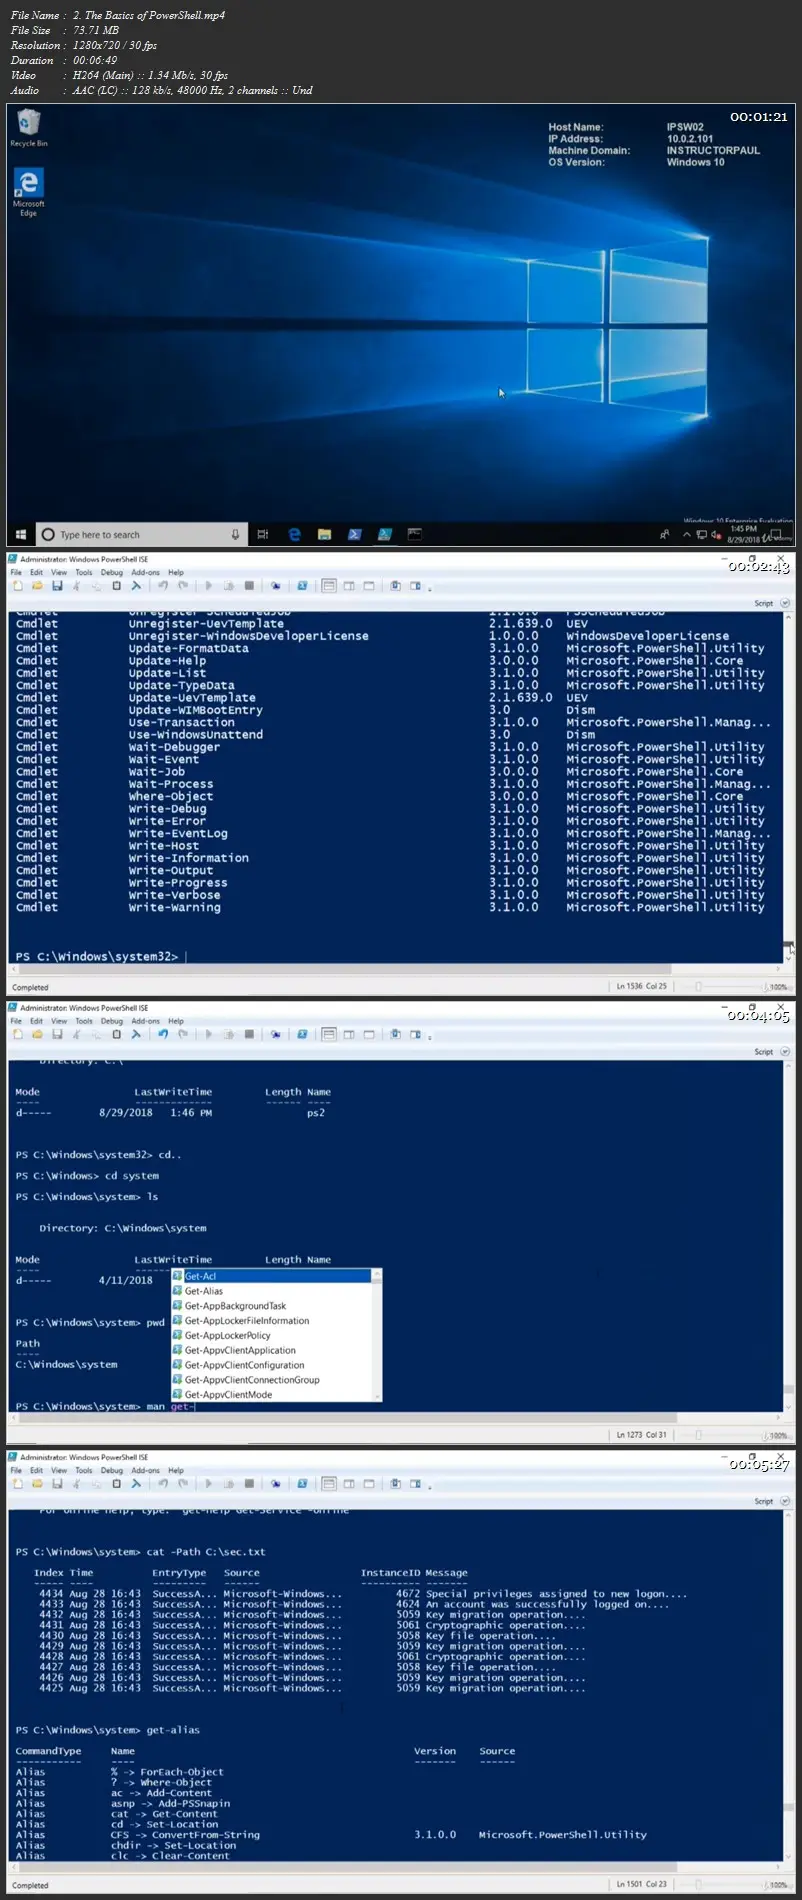 download and install windows powershell 5.1